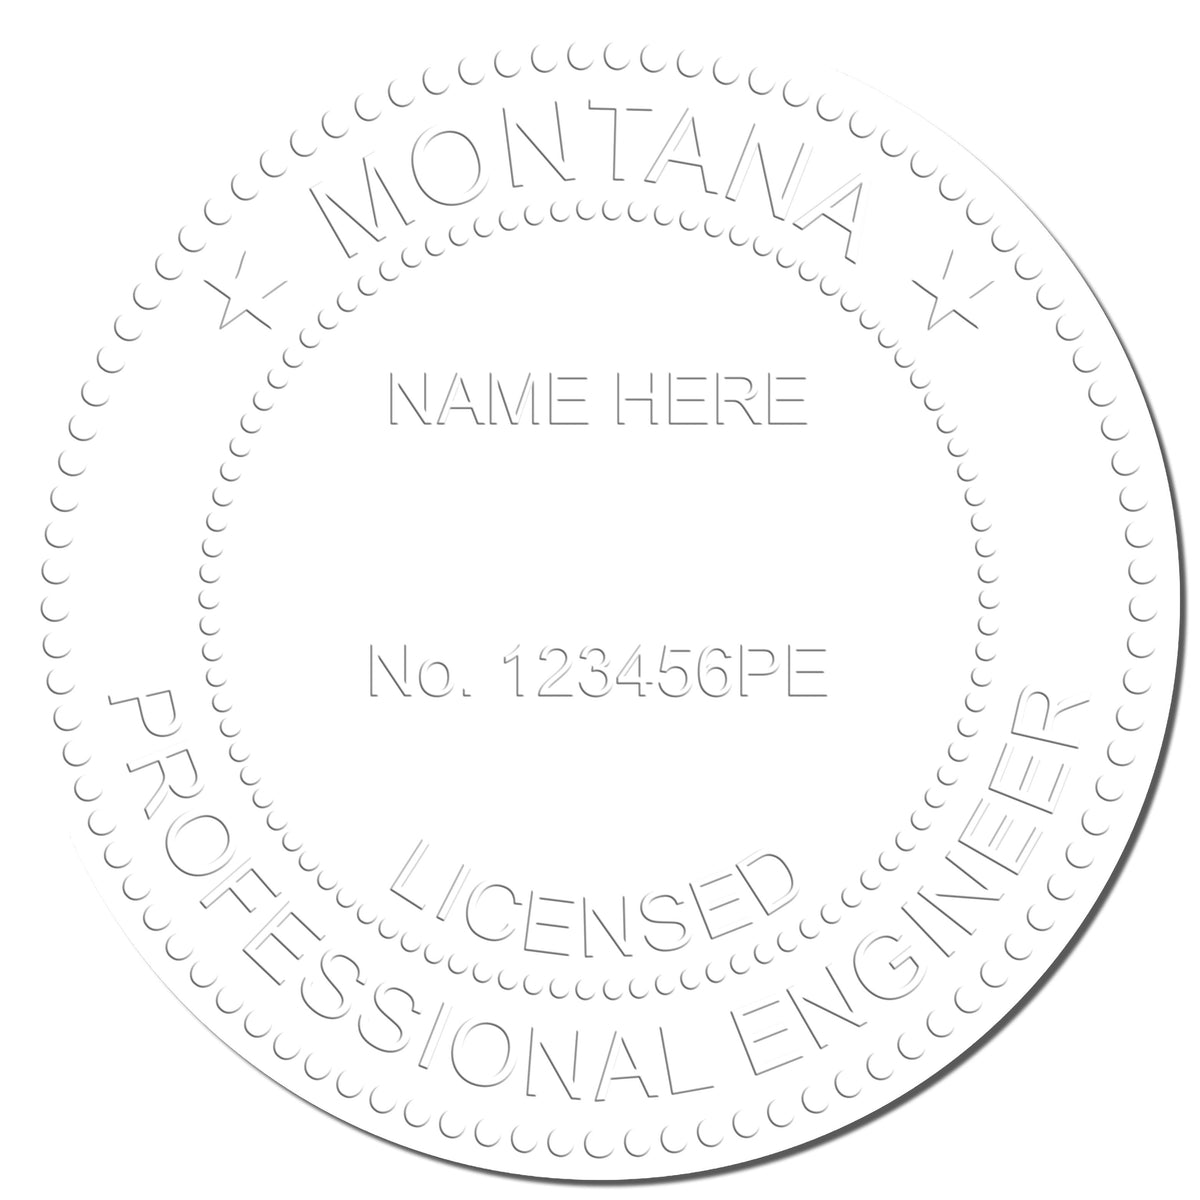 This paper is stamped with a sample imprint of the State of Montana Extended Long Reach Engineer Seal, signifying its quality and reliability.